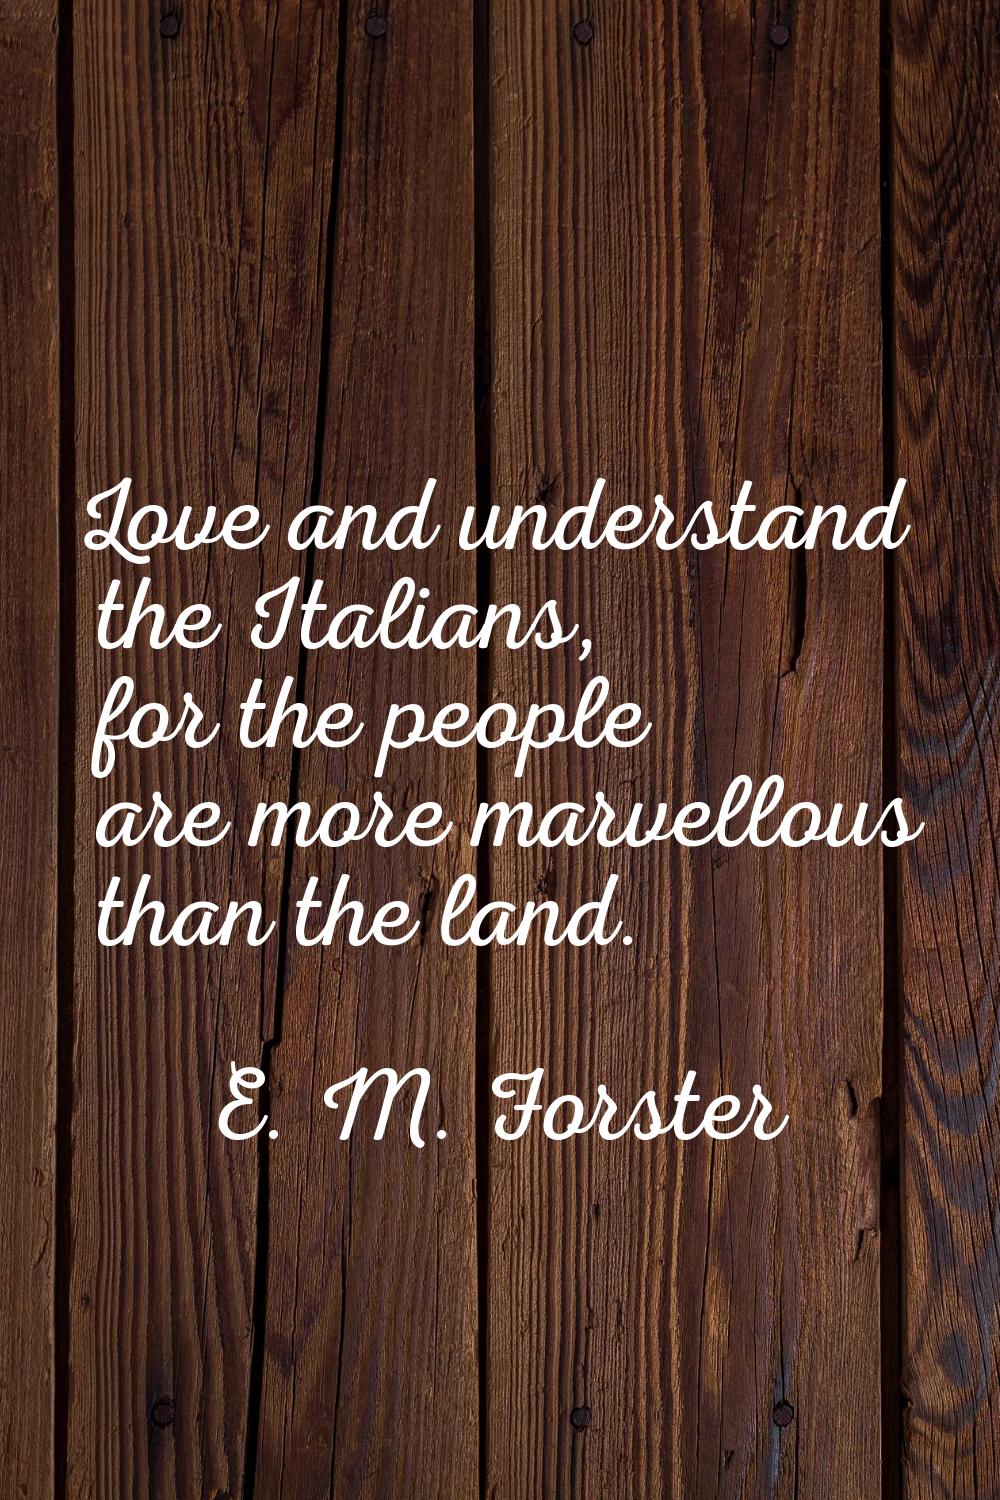 Love and understand the Italians, for the people are more marvellous than the land.